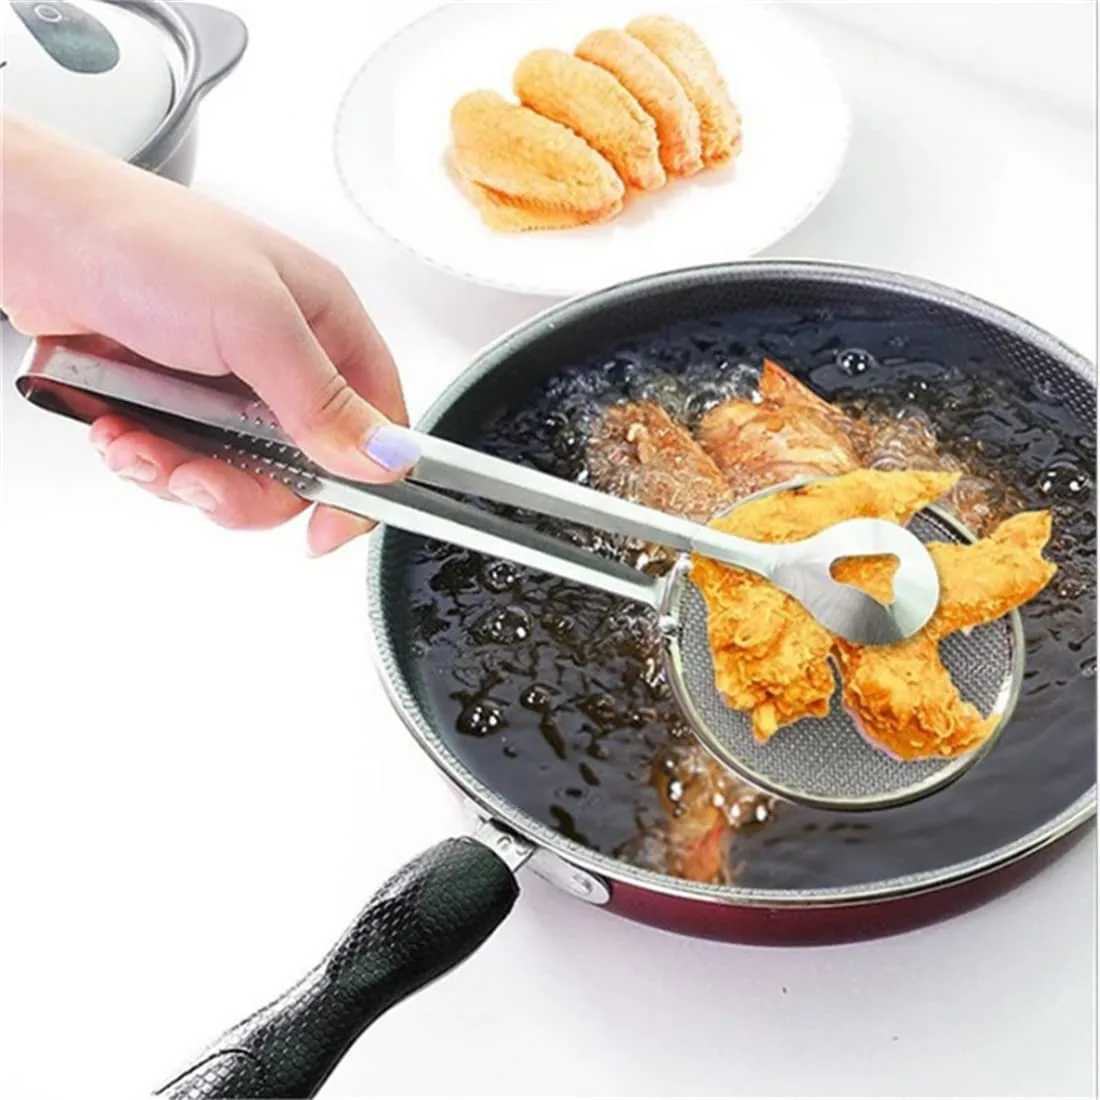 Kitchen Cooking Utensils Stainless Steel Fried Food Fishing Oil Scoop,Strainer Spoon Ladle,Colander Sieve Sifters with Long Handle for Cooking Fryer Frying Food